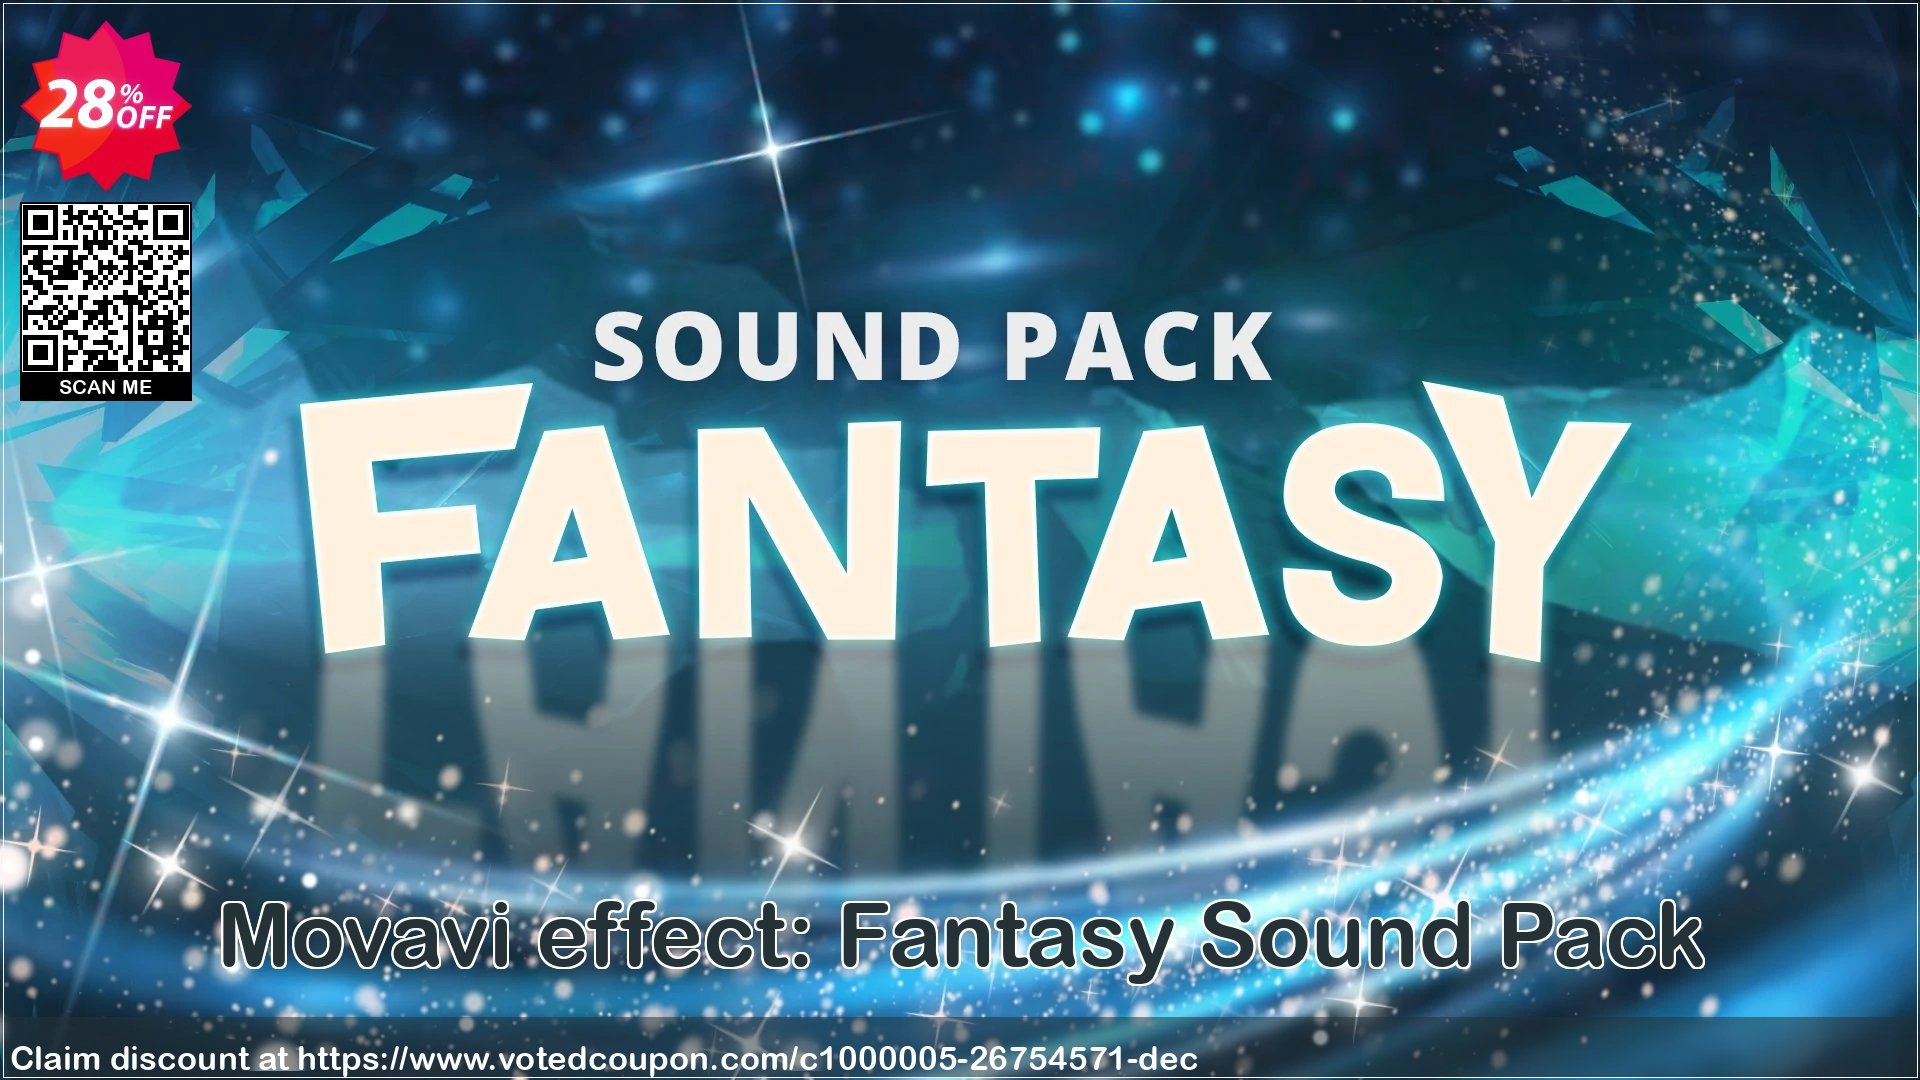 Movavi effect: Fantasy Sound Pack Coupon Code Apr 2024, 28% OFF - VotedCoupon